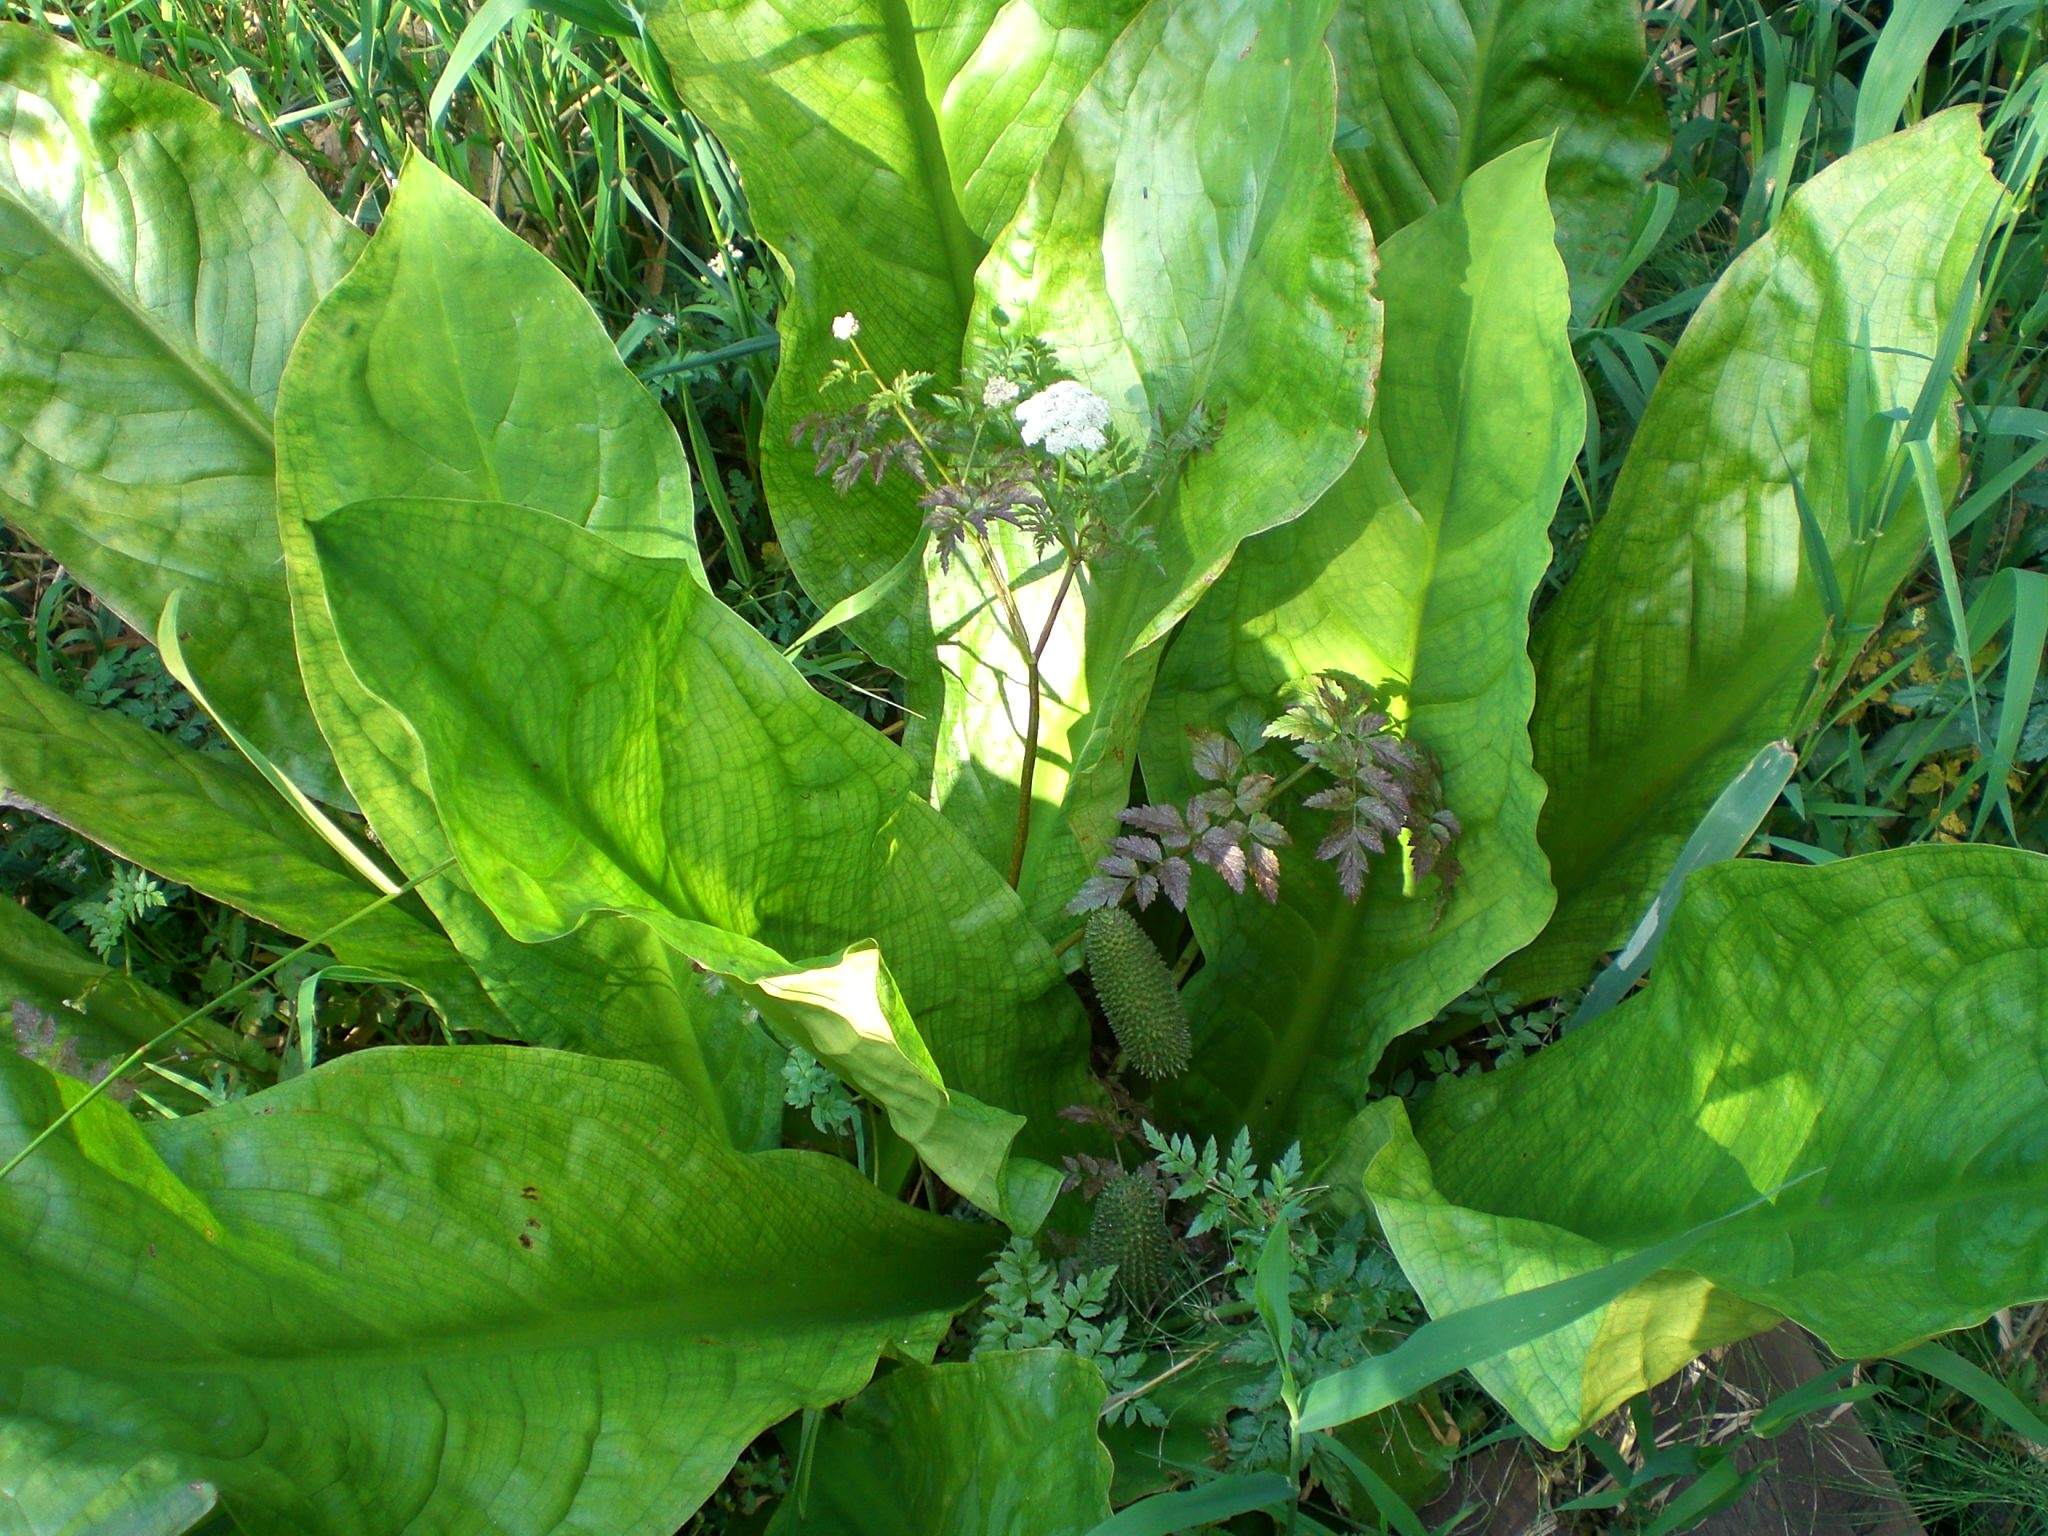 a plant with lots of green leaves is seen here